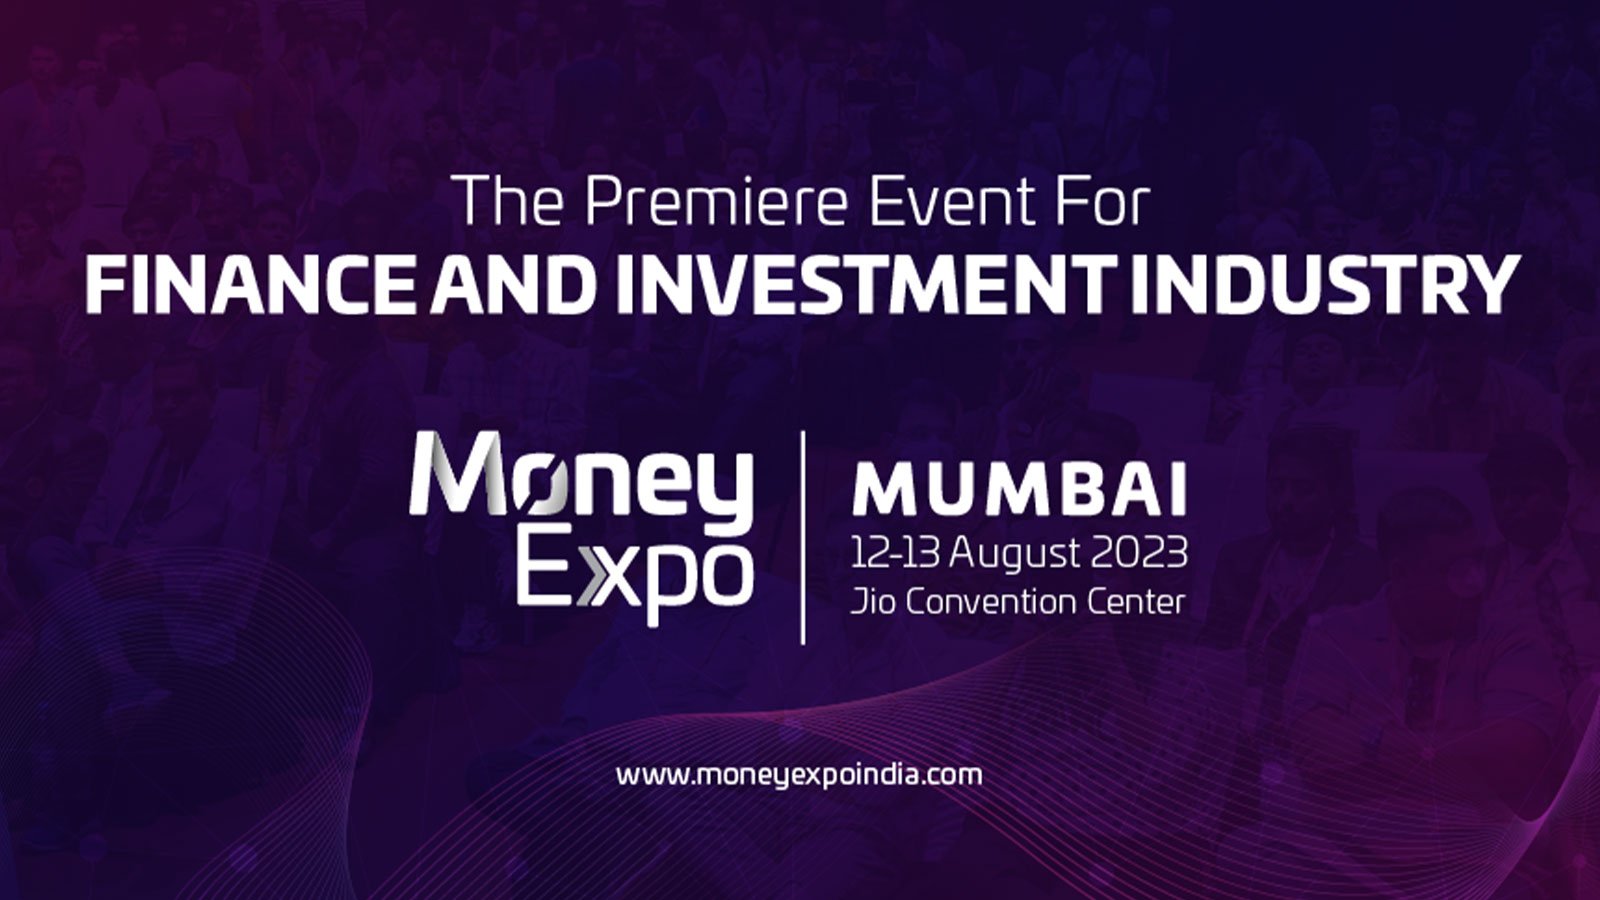 Get Ready for the Highly Anticipated MoneyExpo India 2023